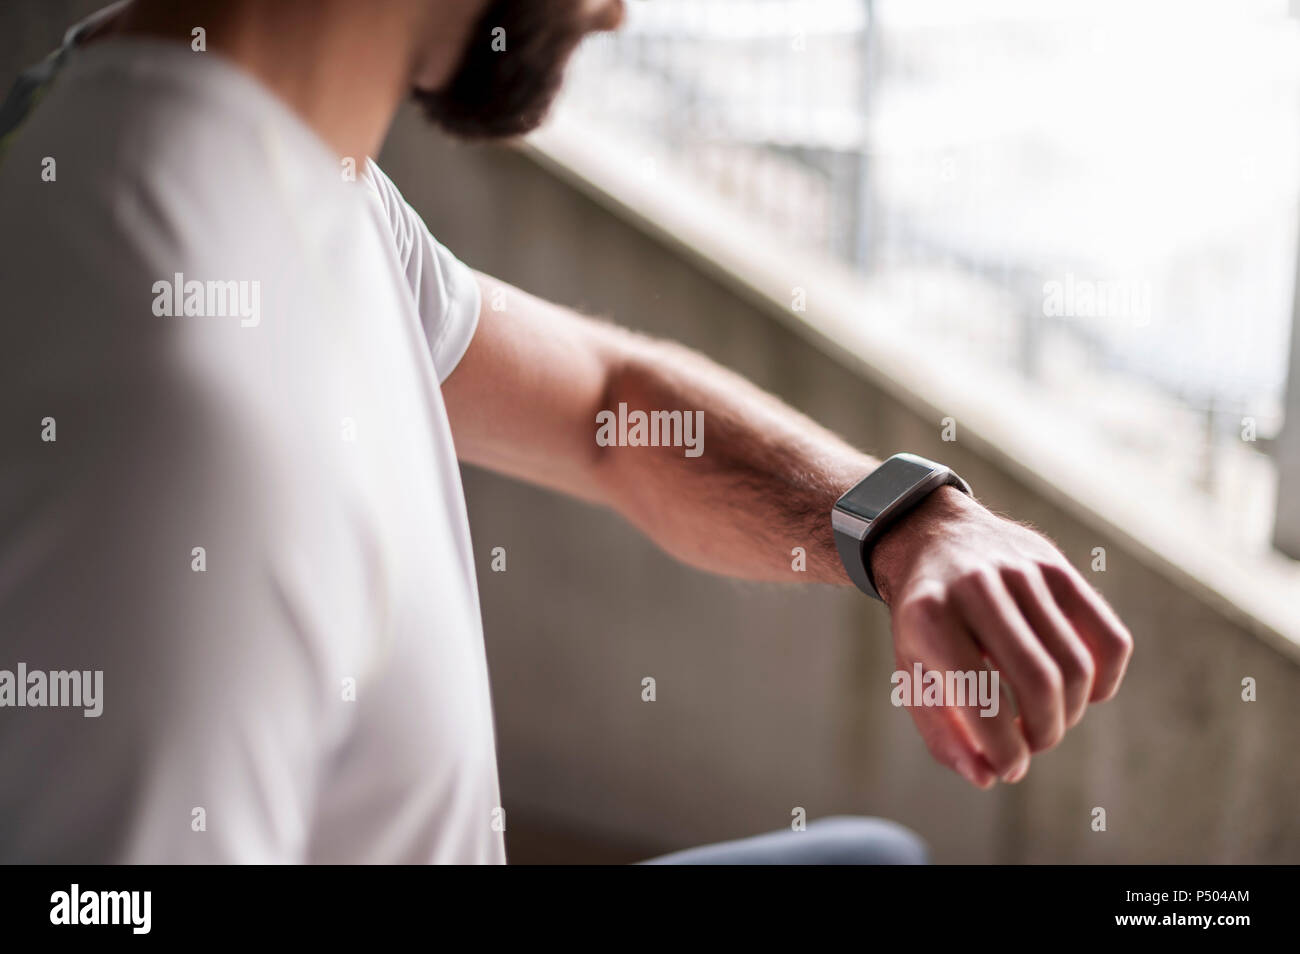 Athlete checking the time on a smartwatch Stock Photo